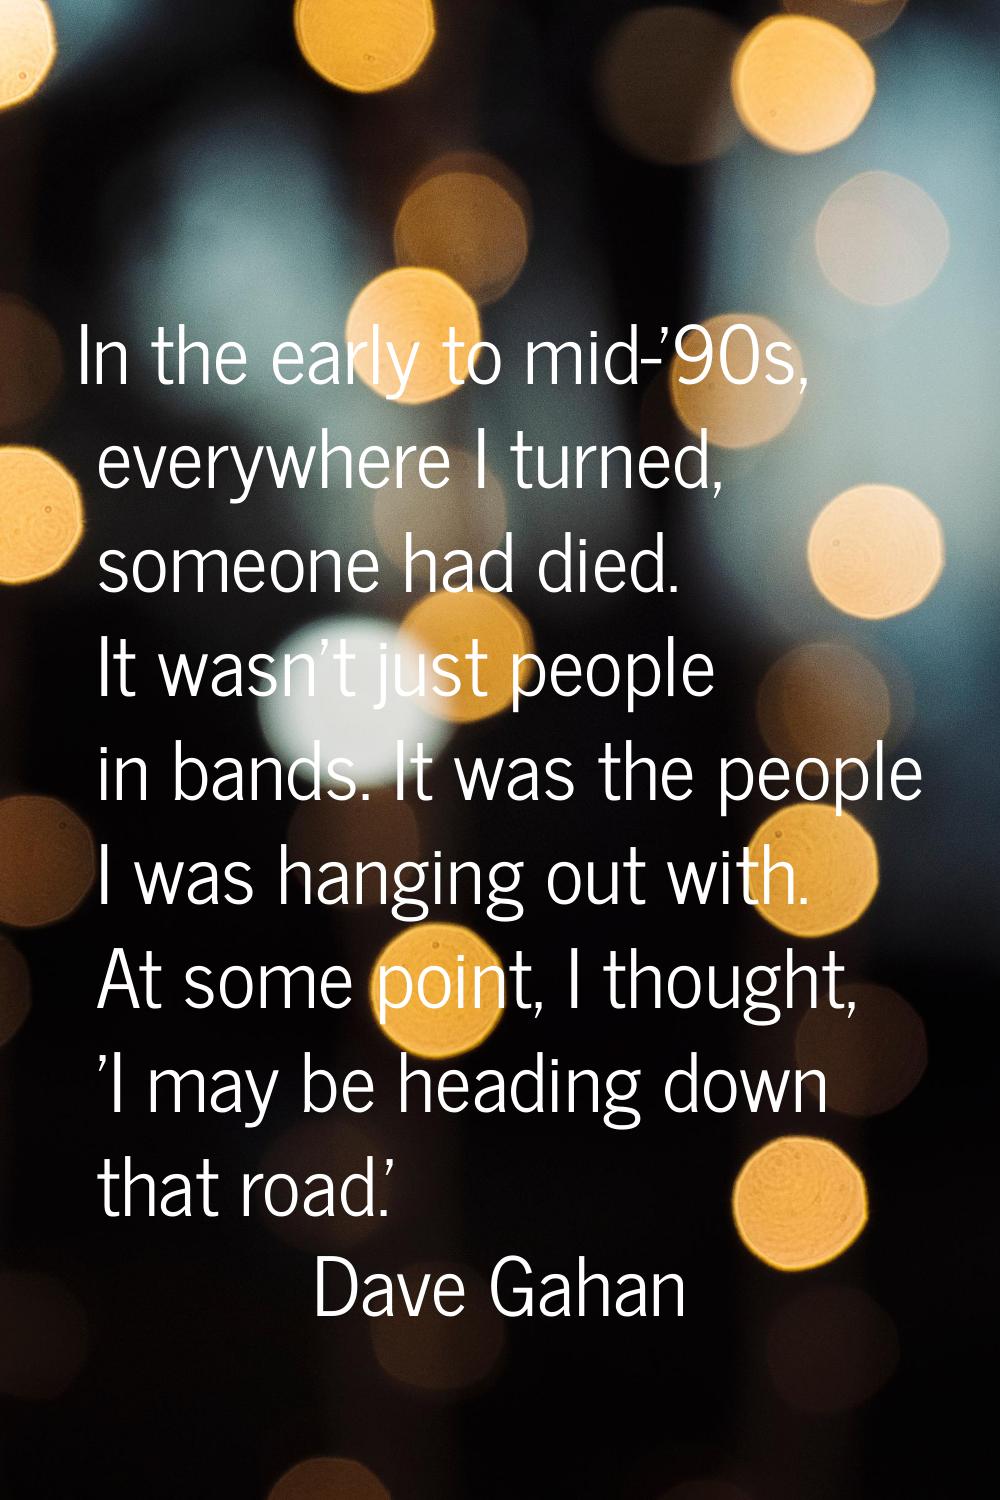 In the early to mid-'90s, everywhere I turned, someone had died. It wasn't just people in bands. It